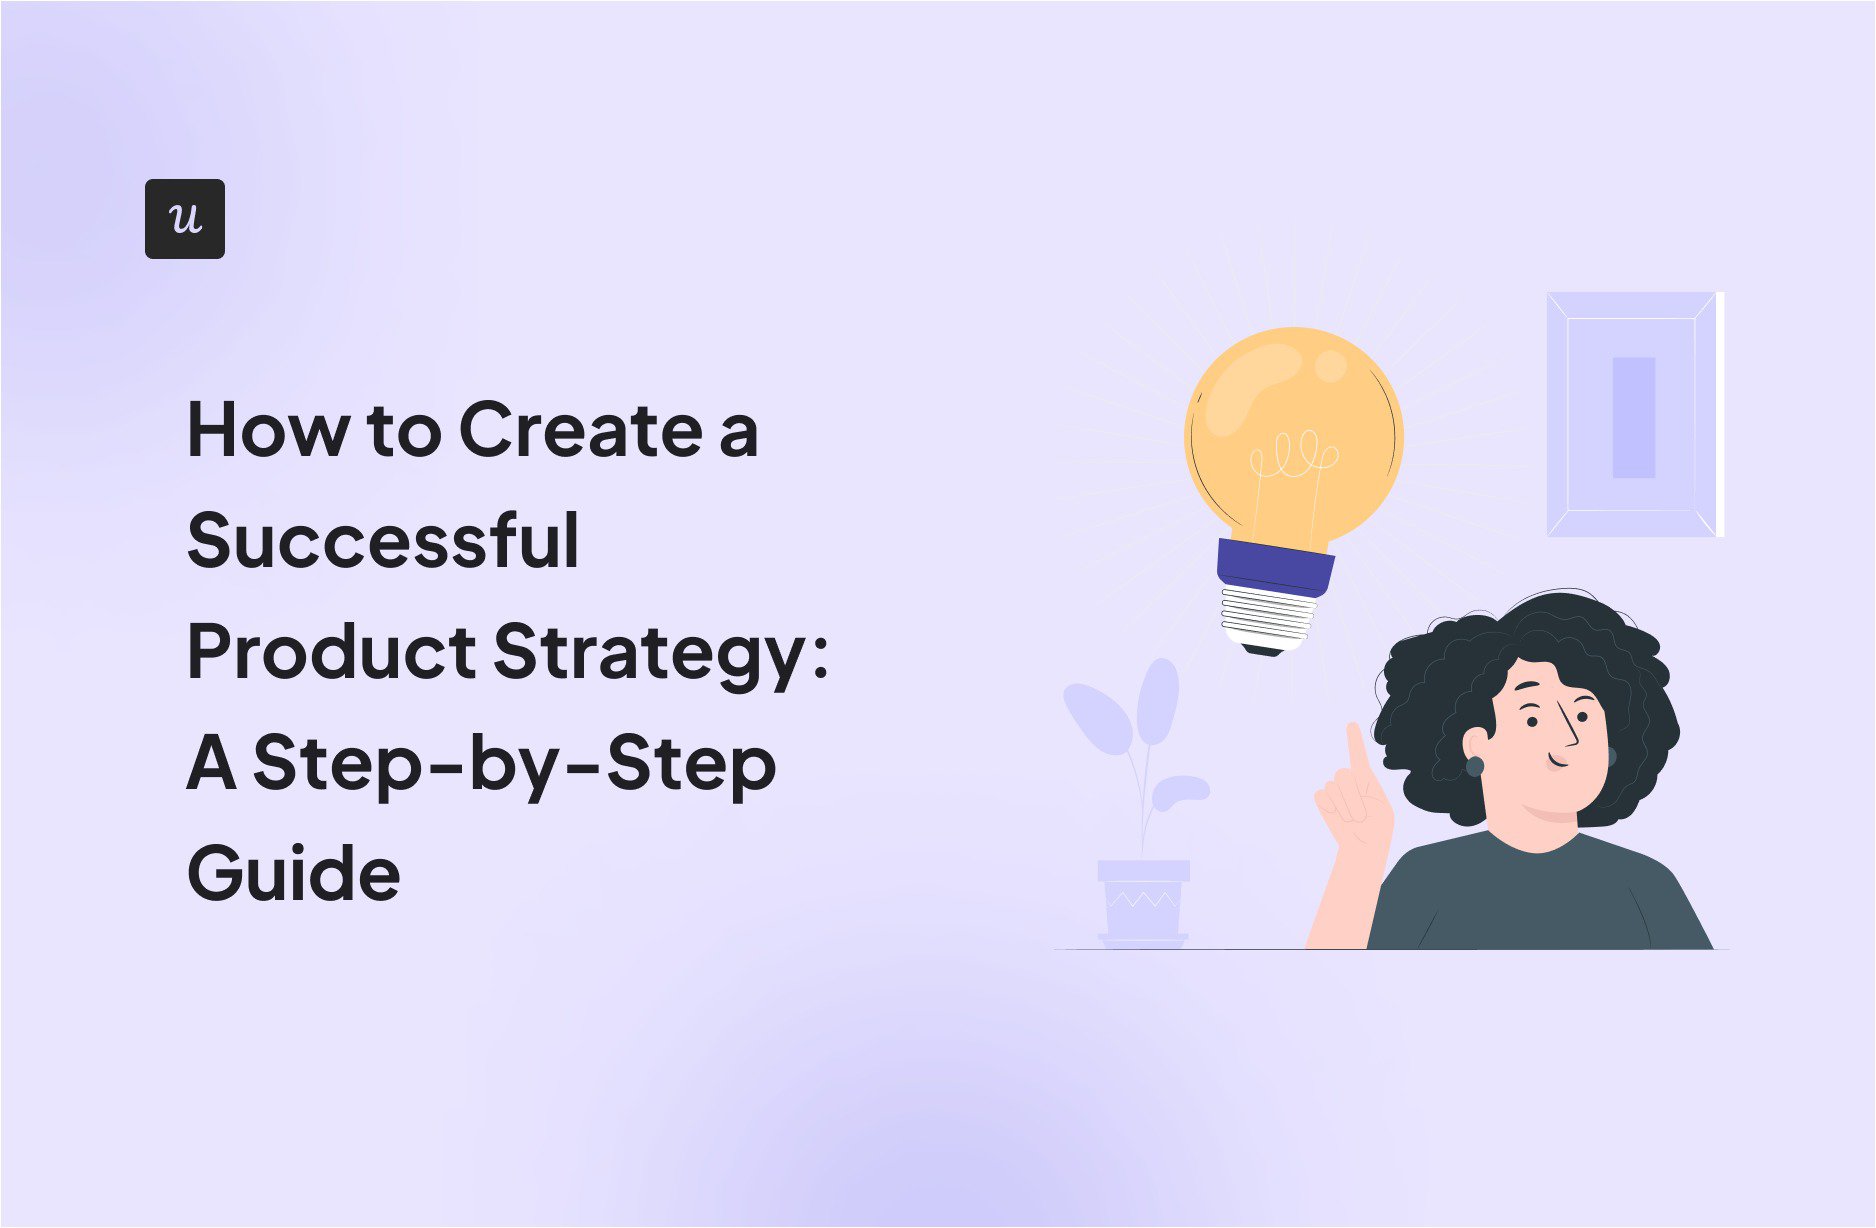 How to Create a Successful Product Strategy: A Step-by-Step Guide cover